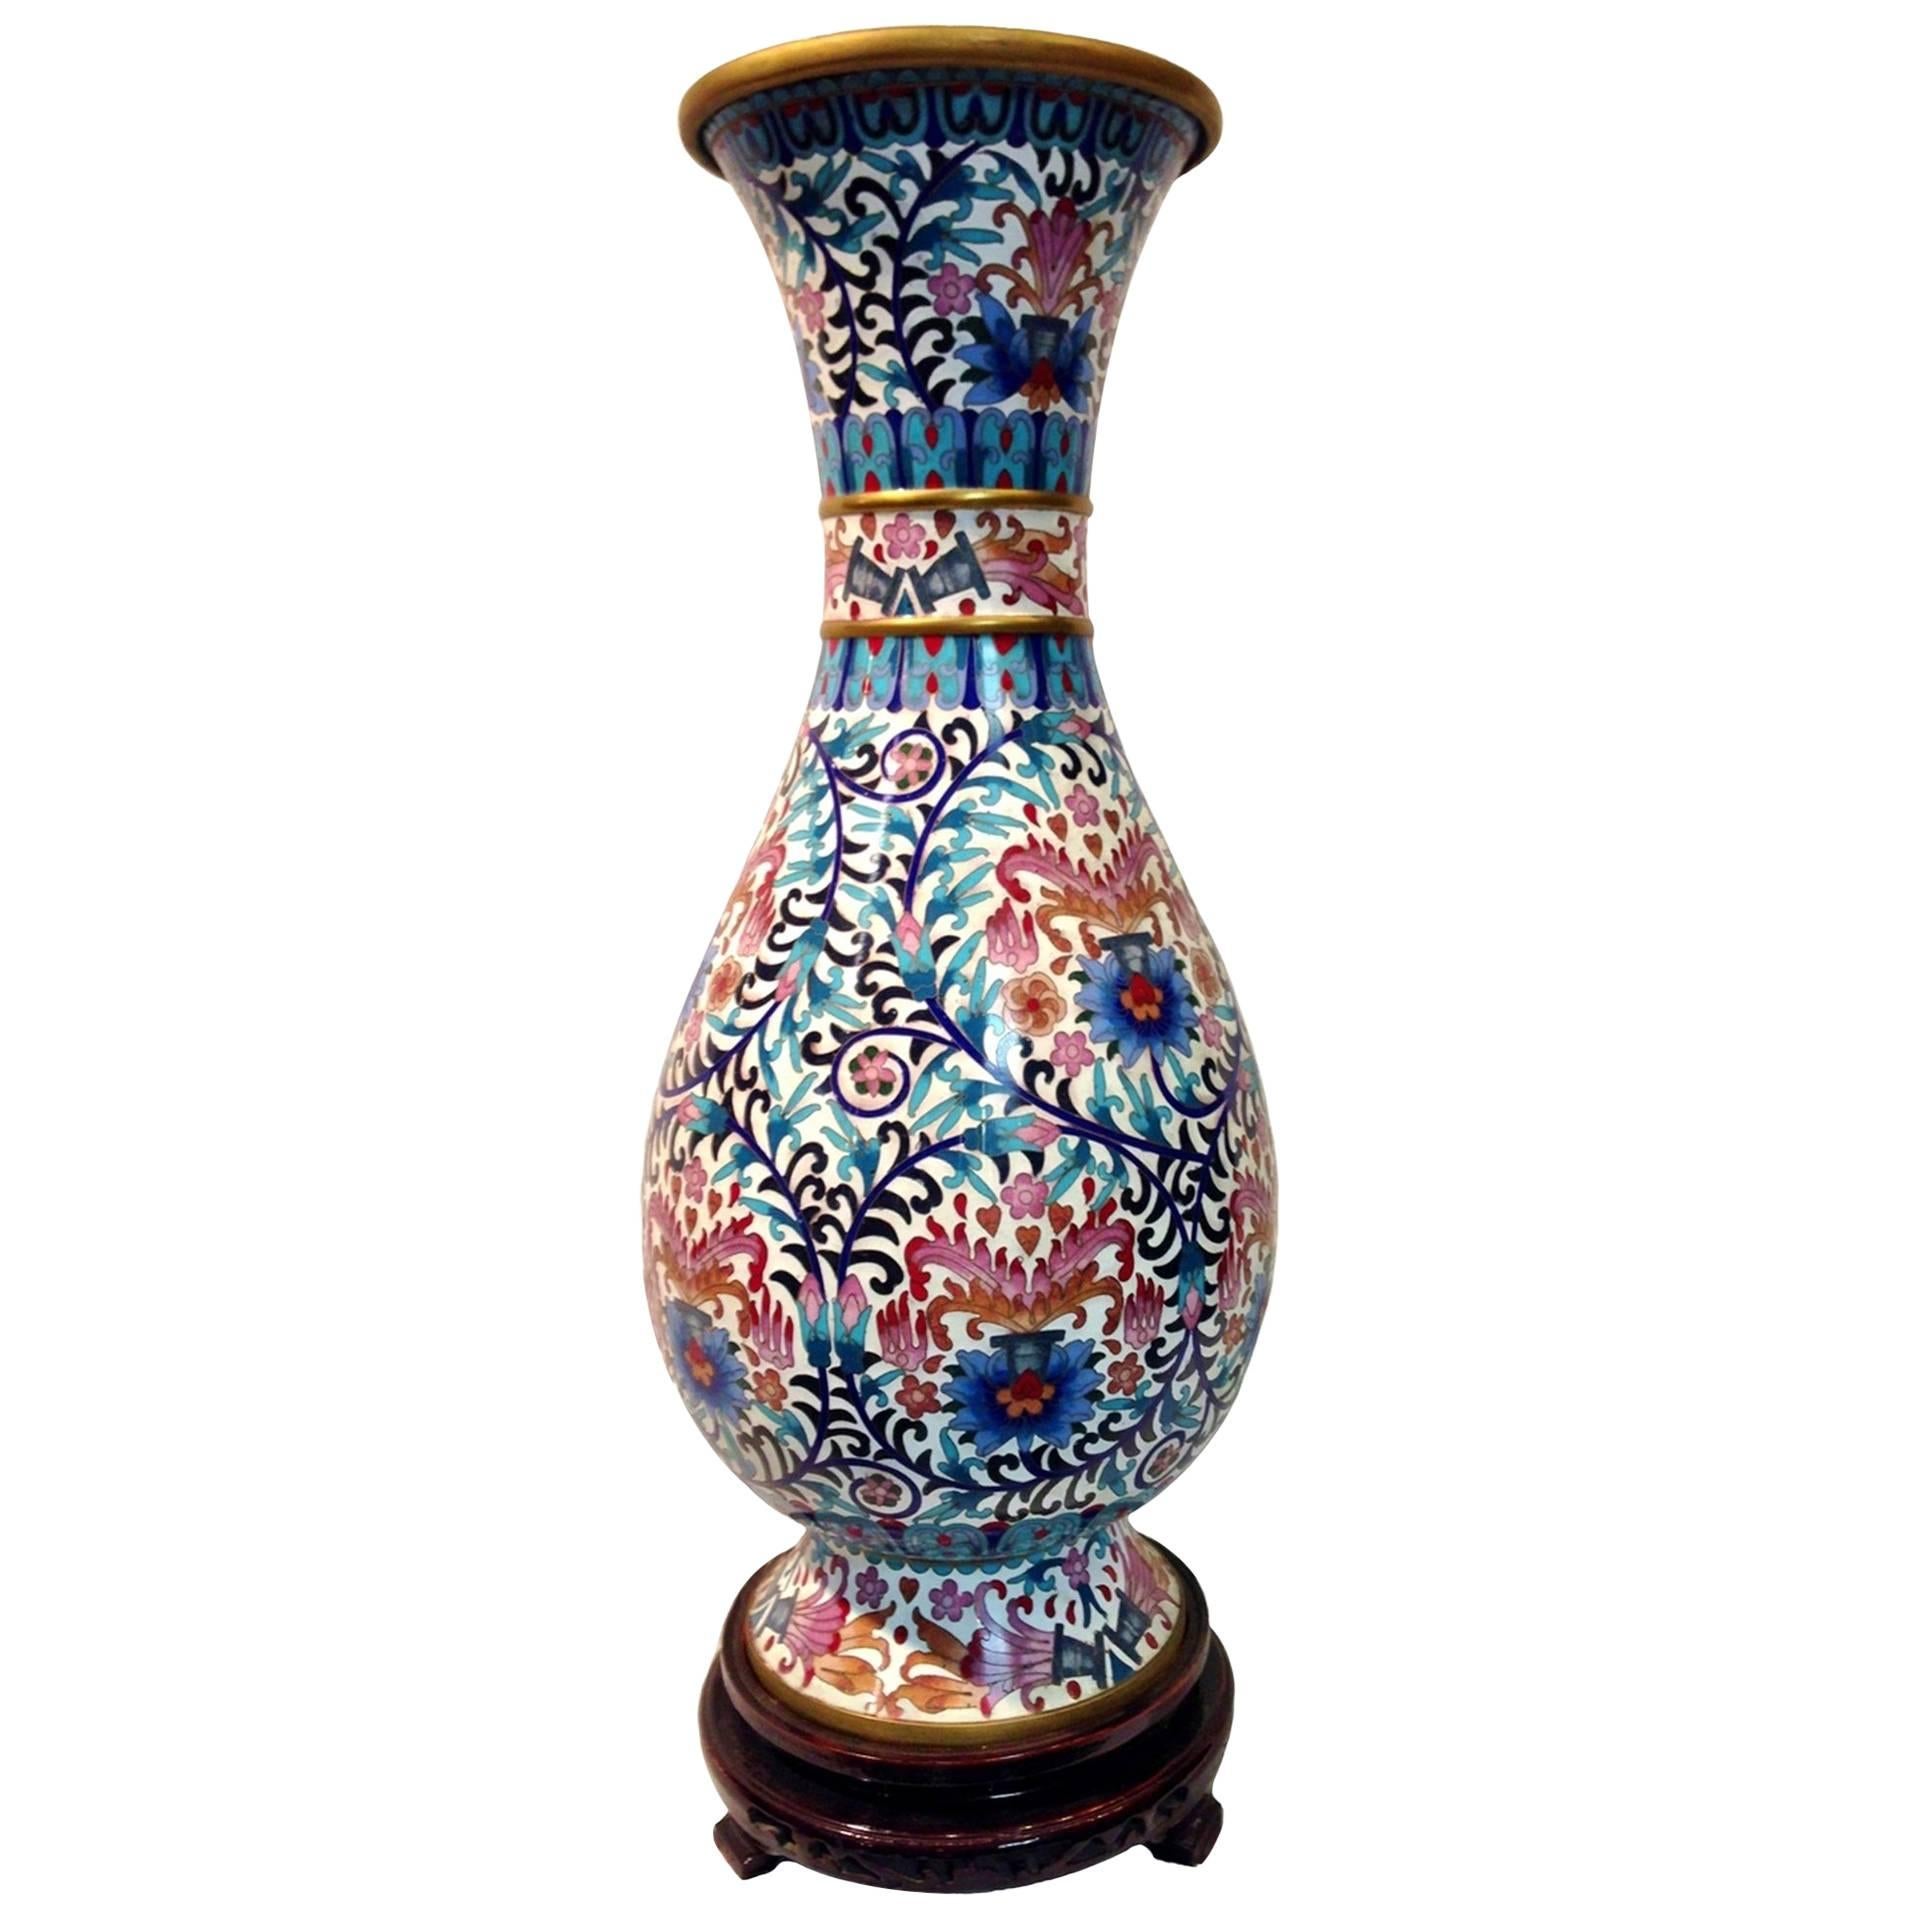 Very Large Cloisonné Vase with Blue Peonies